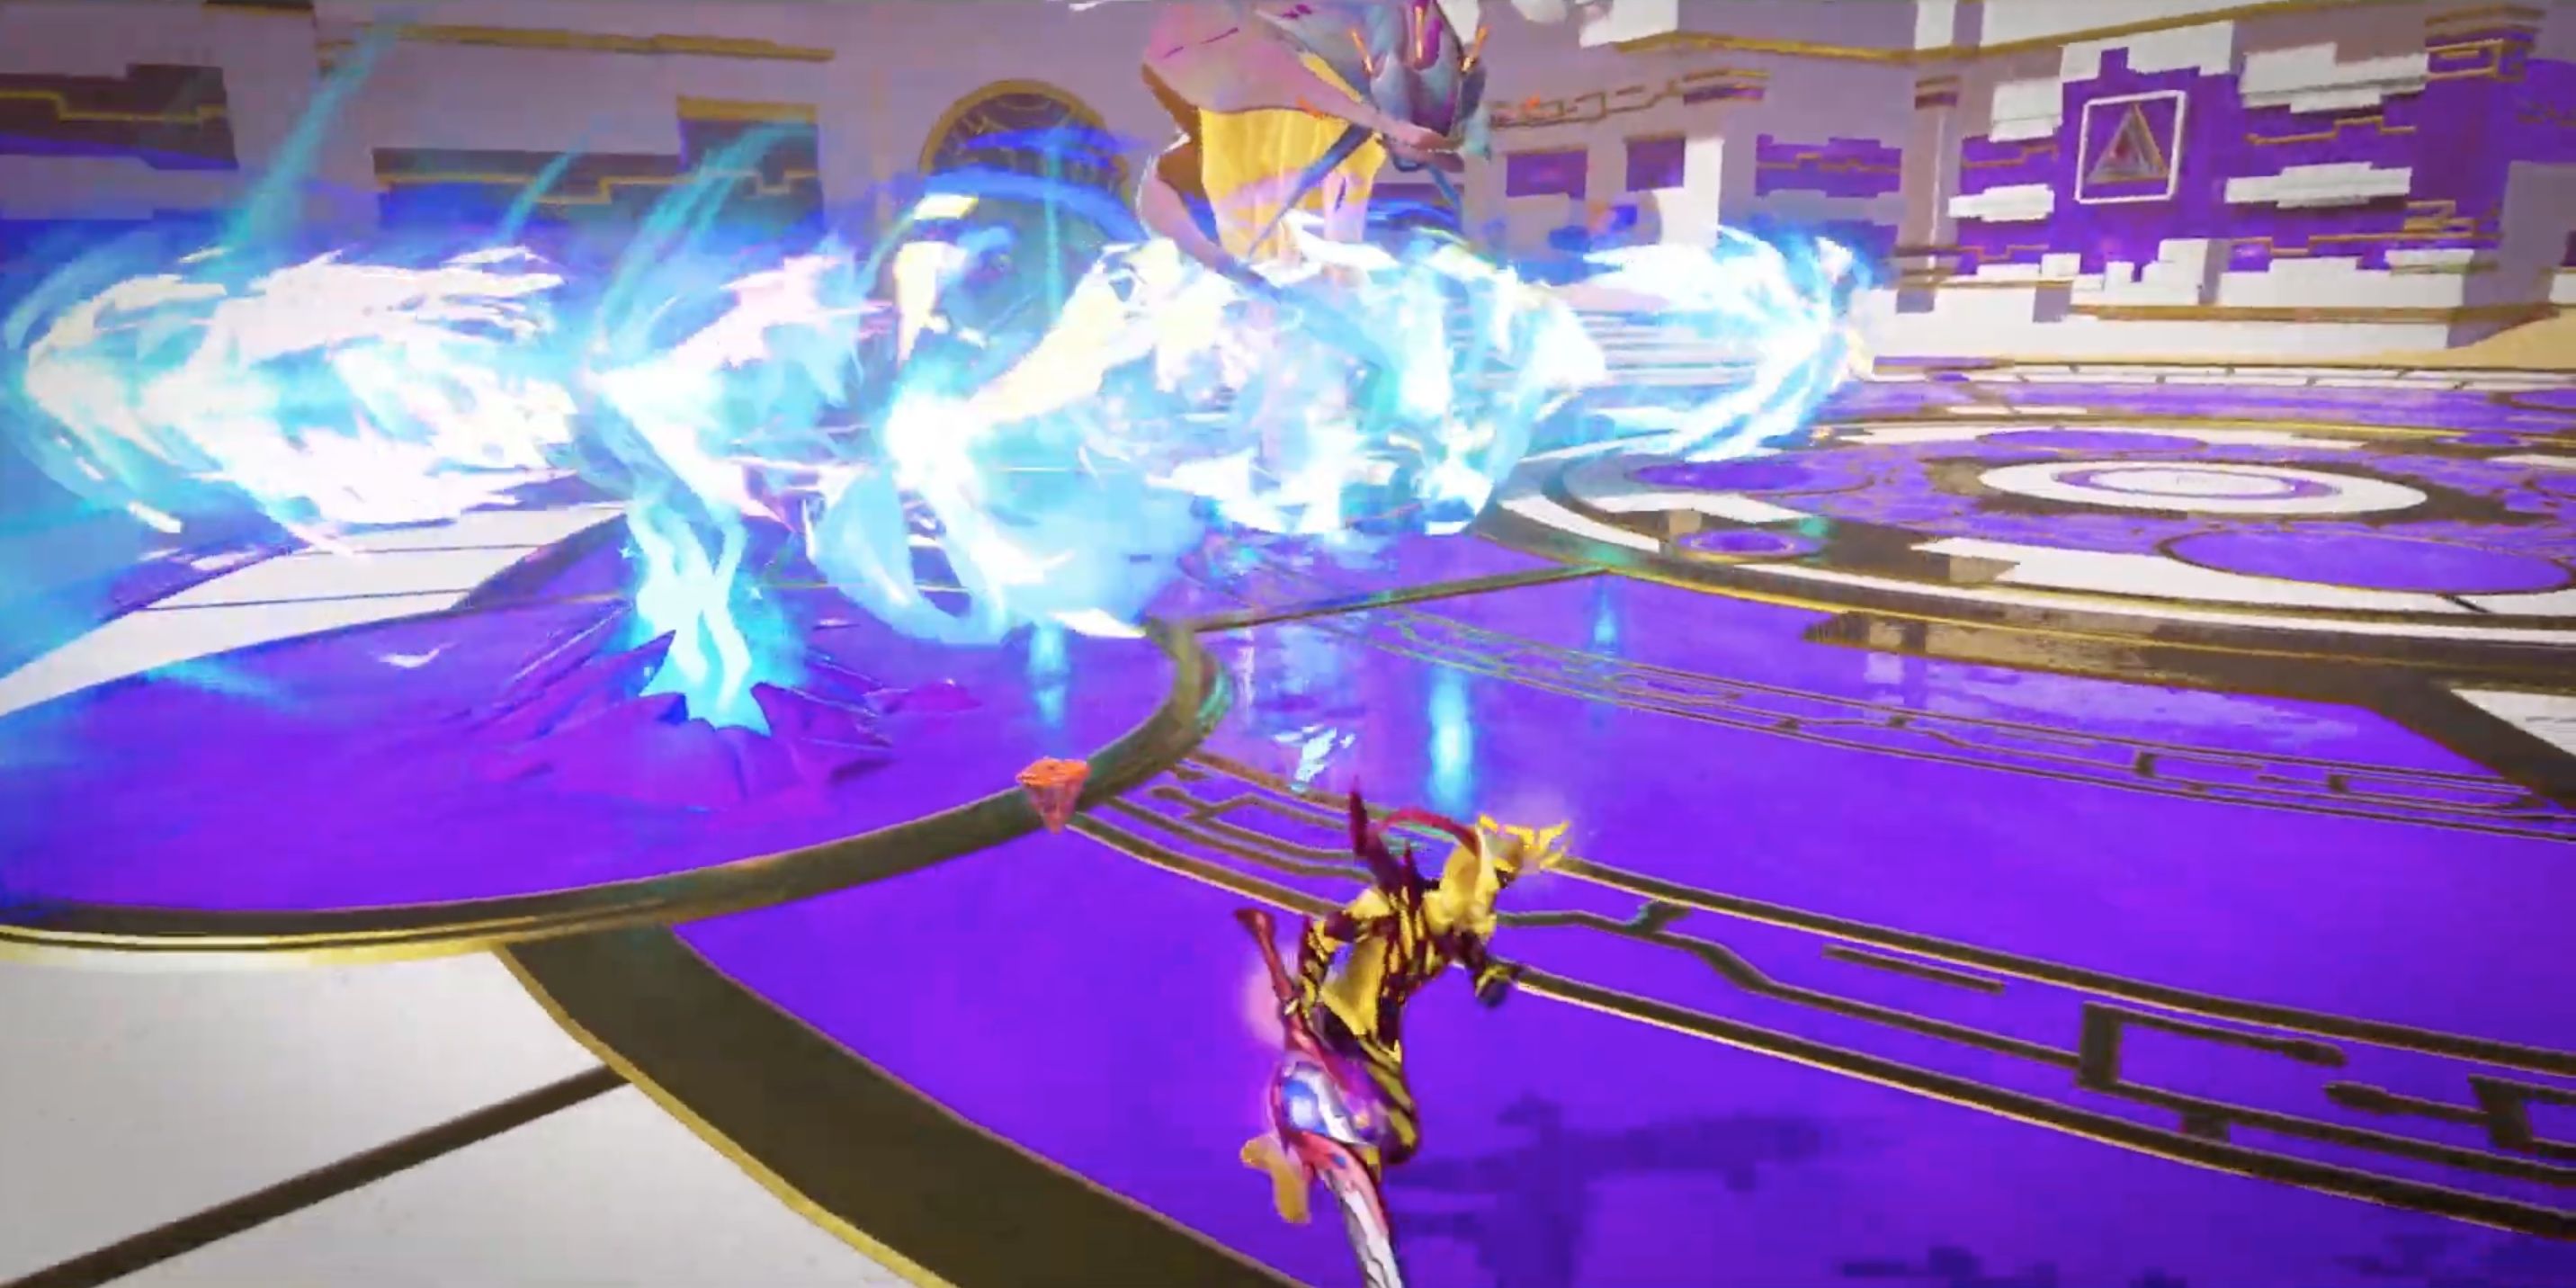 The Chronovore firing energy orbs in all directions in Dauntless